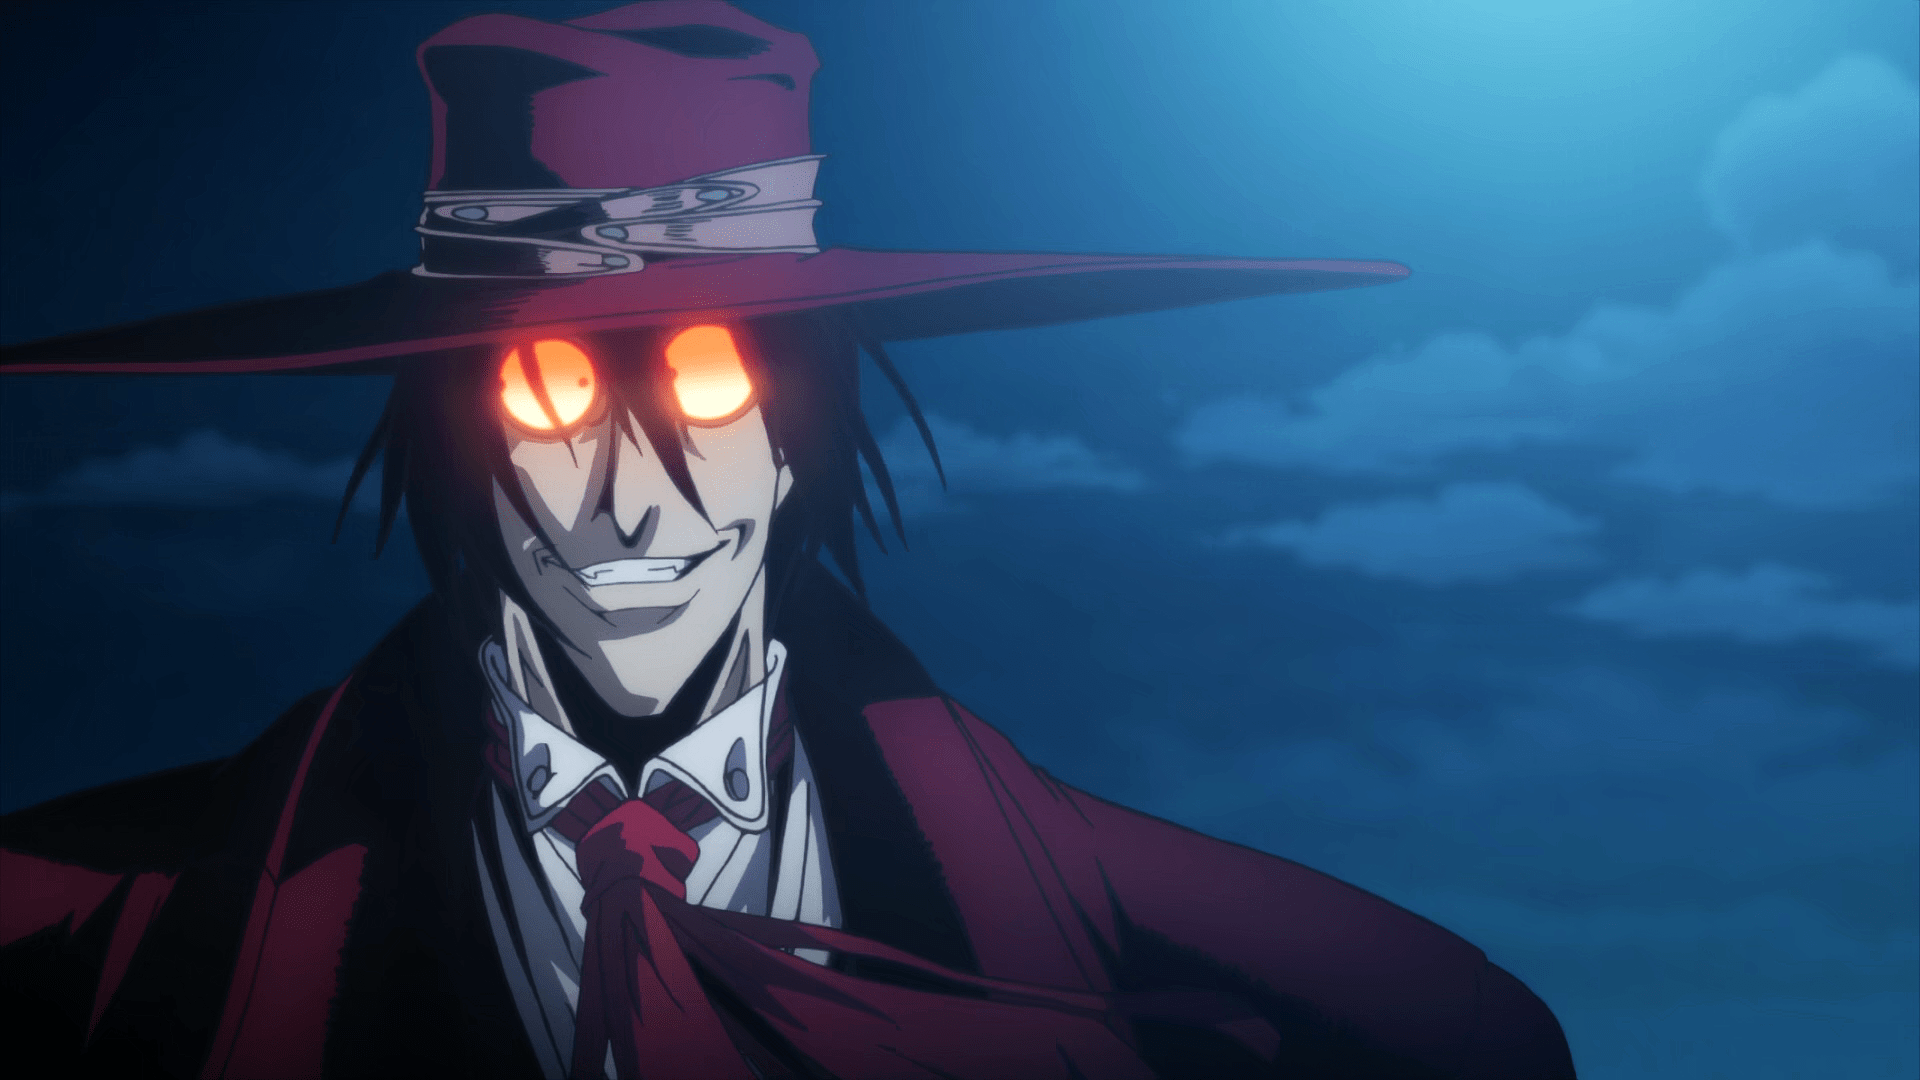 Drifters is the awesome new anime from the mind of Hellsing